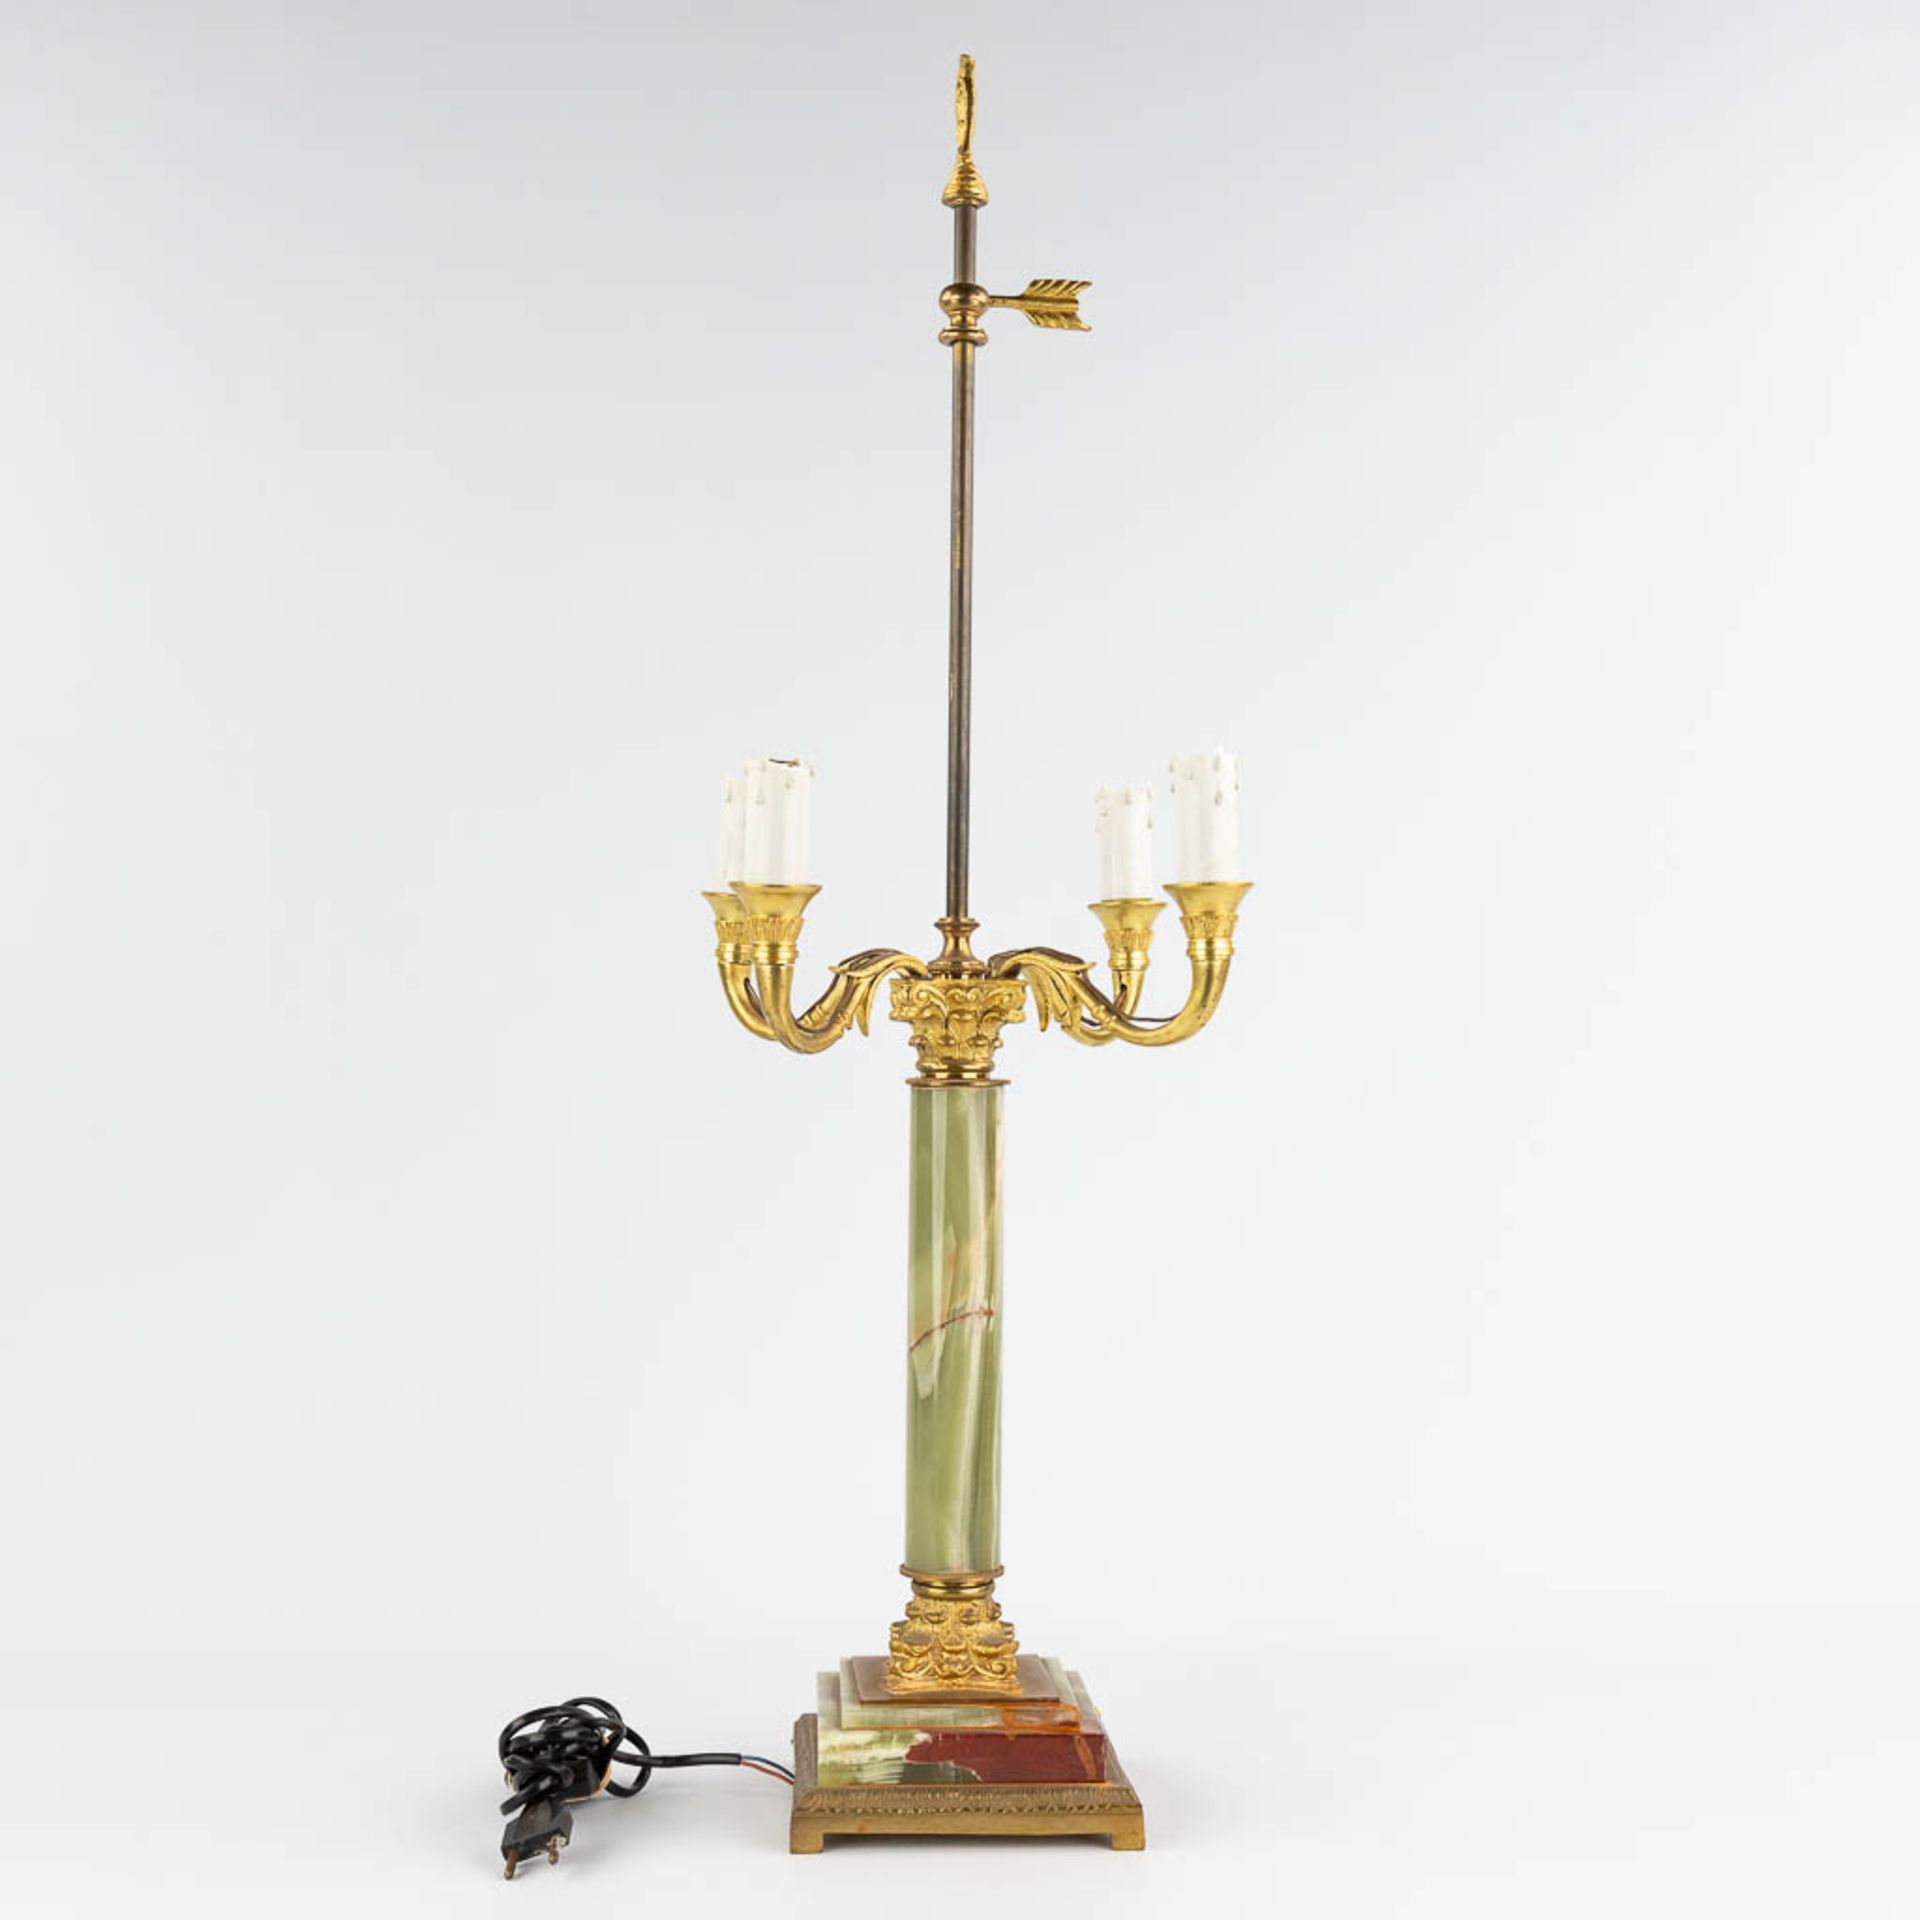 A table lamp, brass and onyx. 20th century. (L: 30 x W: 30 x H: 77 cm) - Image 4 of 13